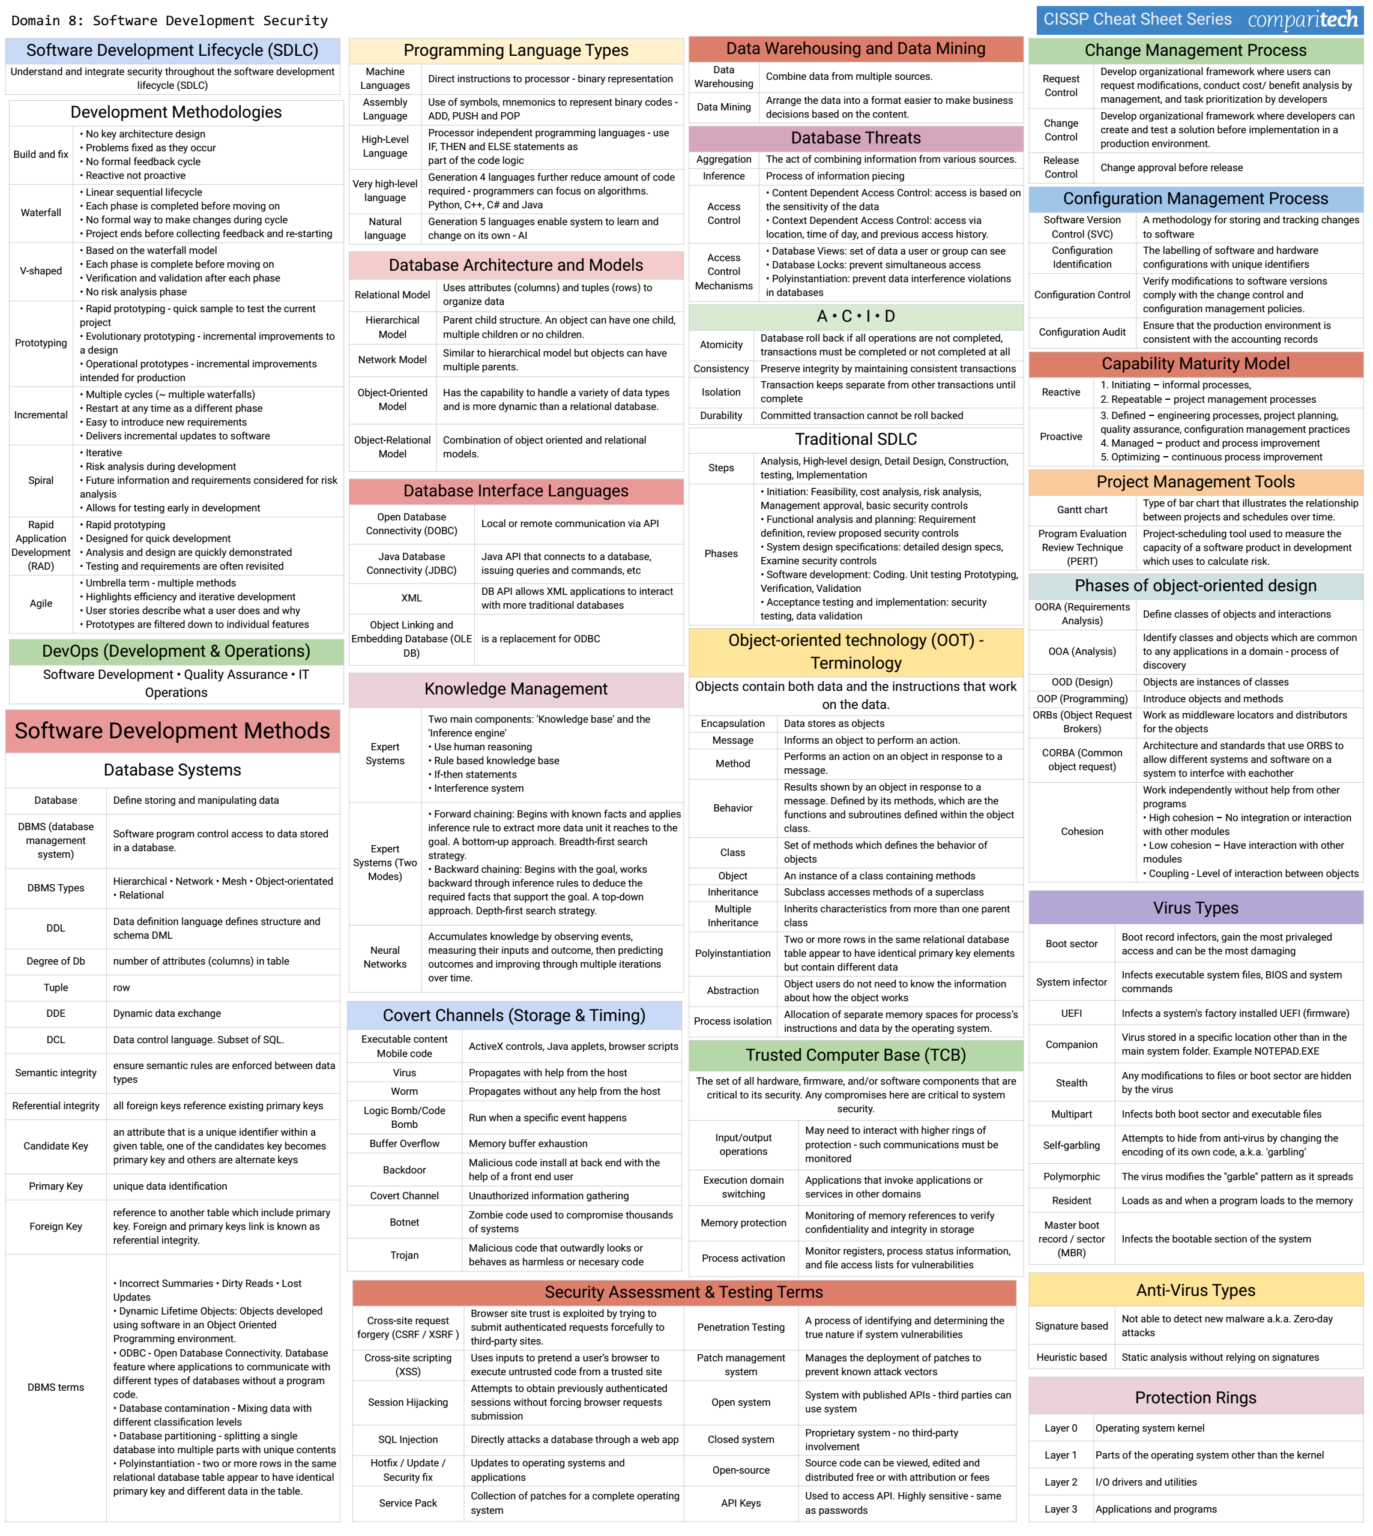 Cheat Sheets For Studying For The Cissp Exam Software Development